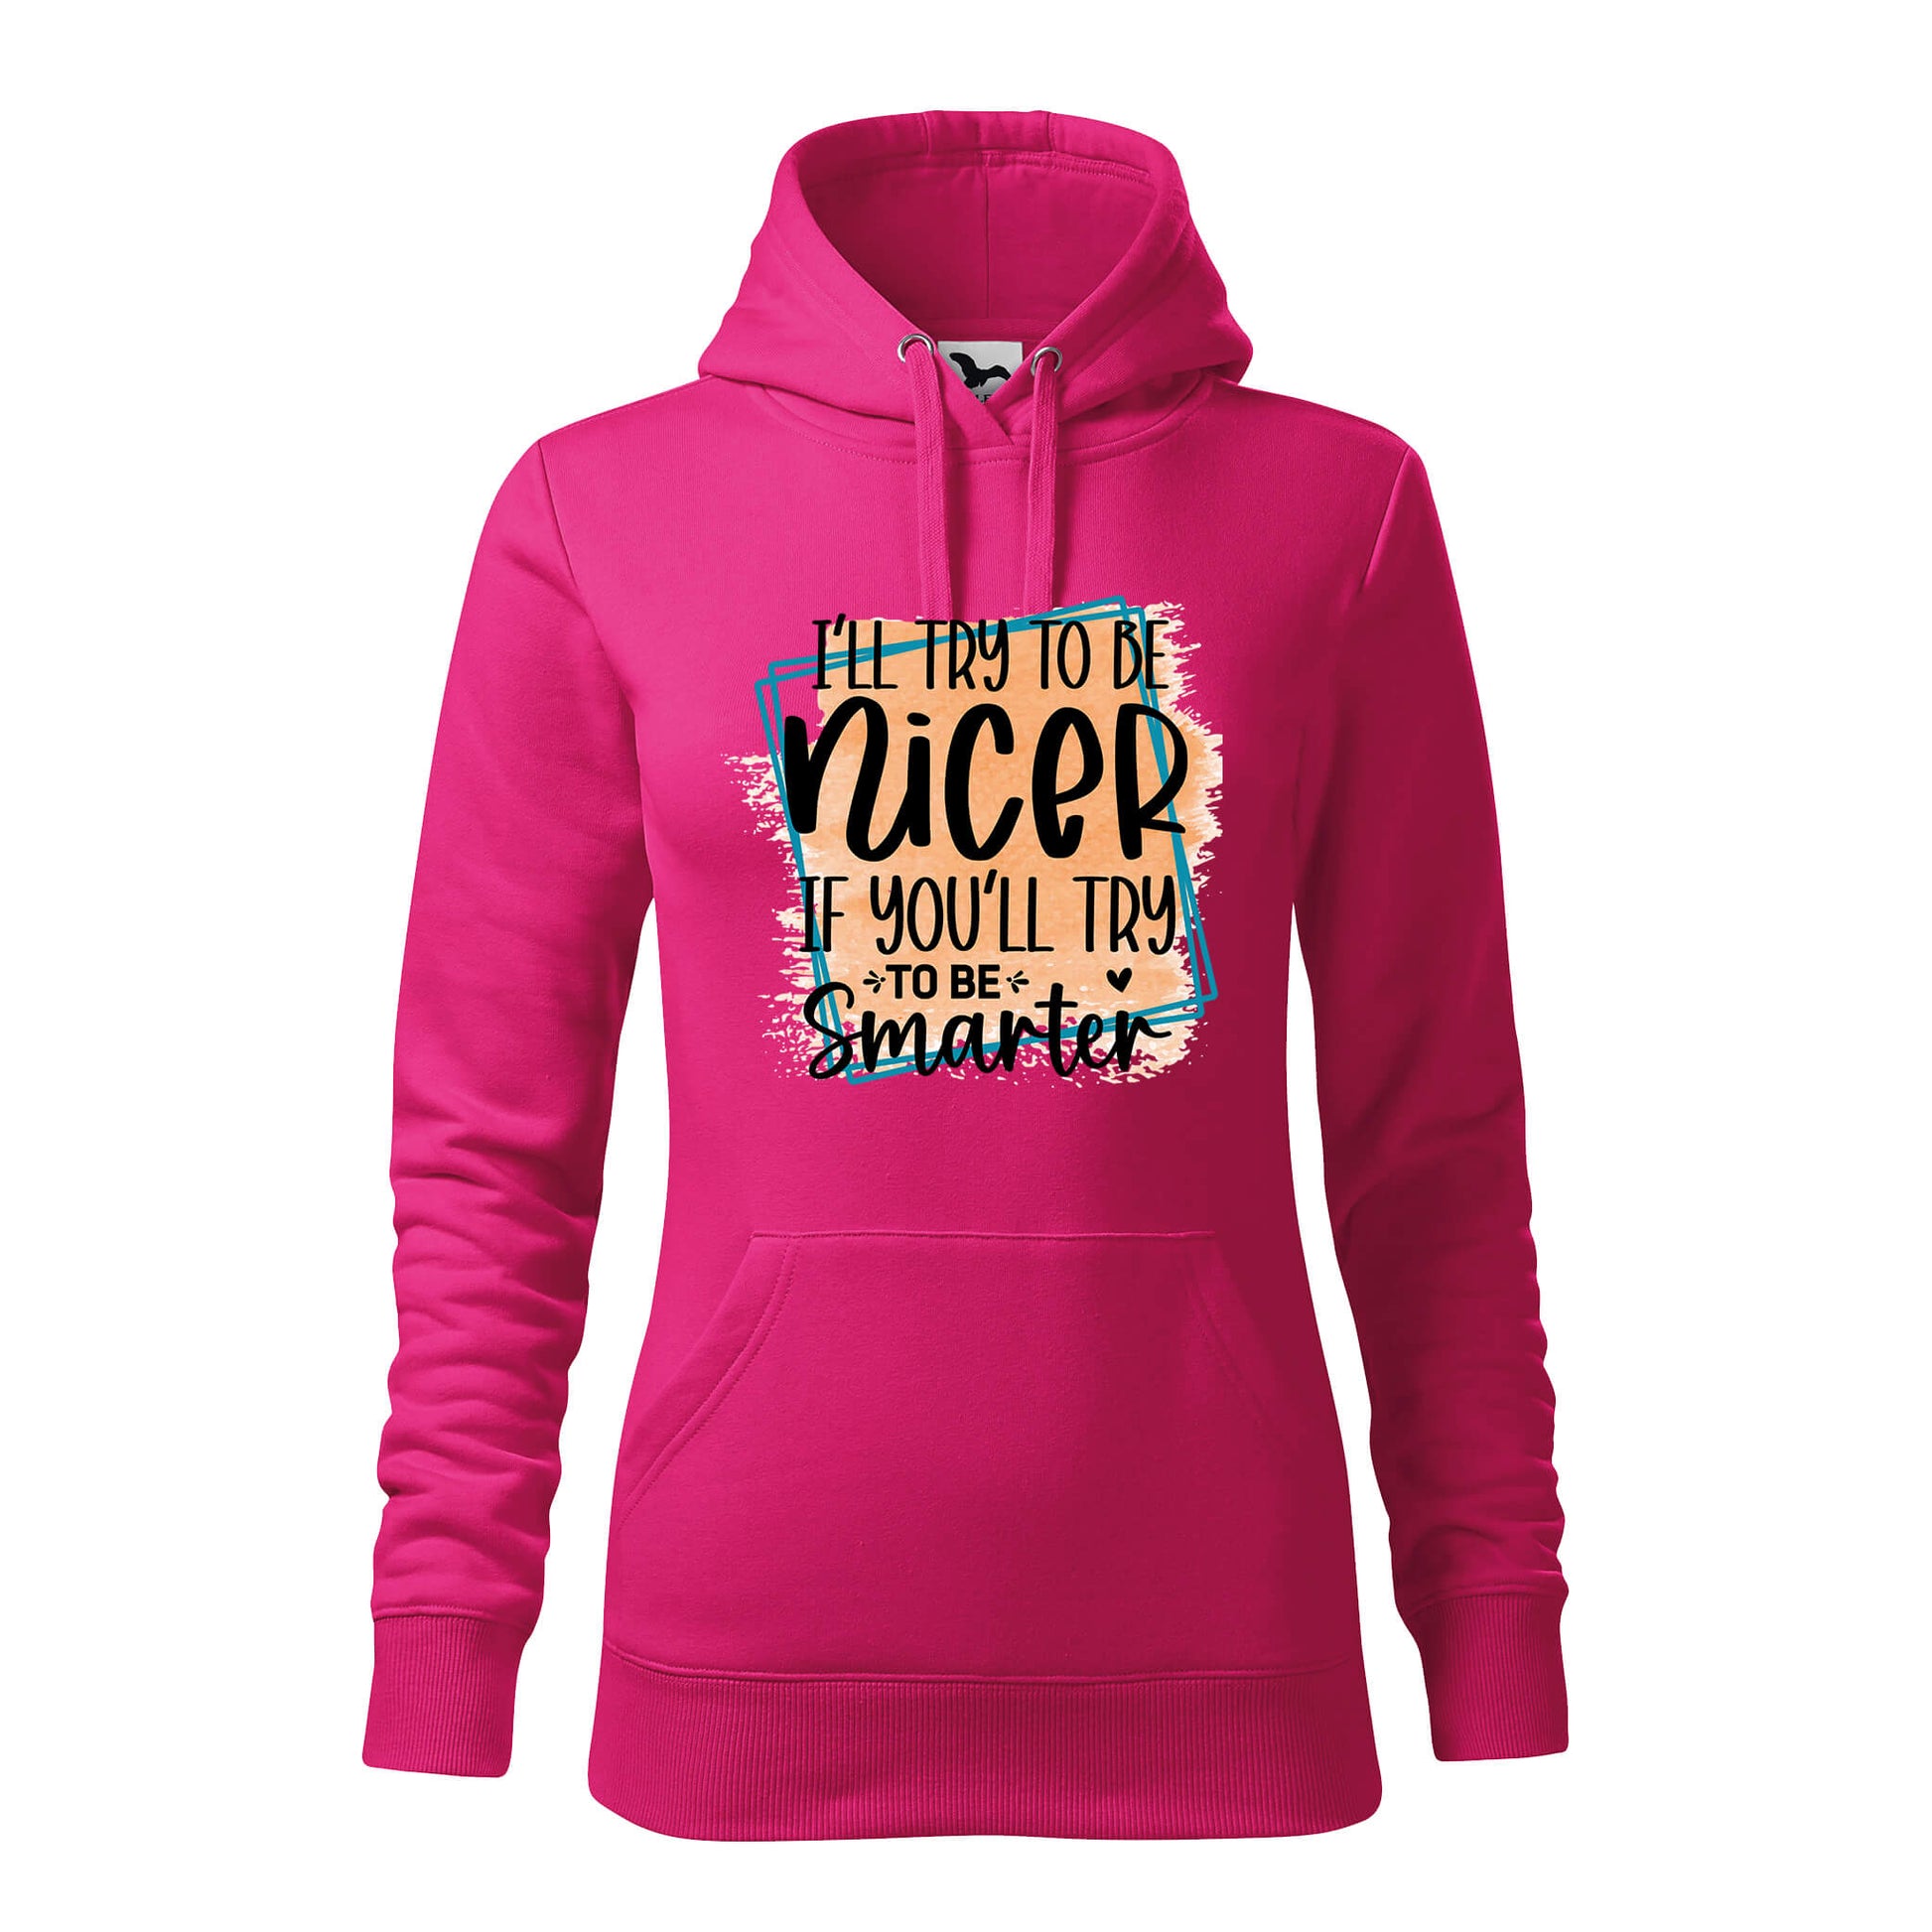 Ill try to be nicer hoodie - rvdesignprint